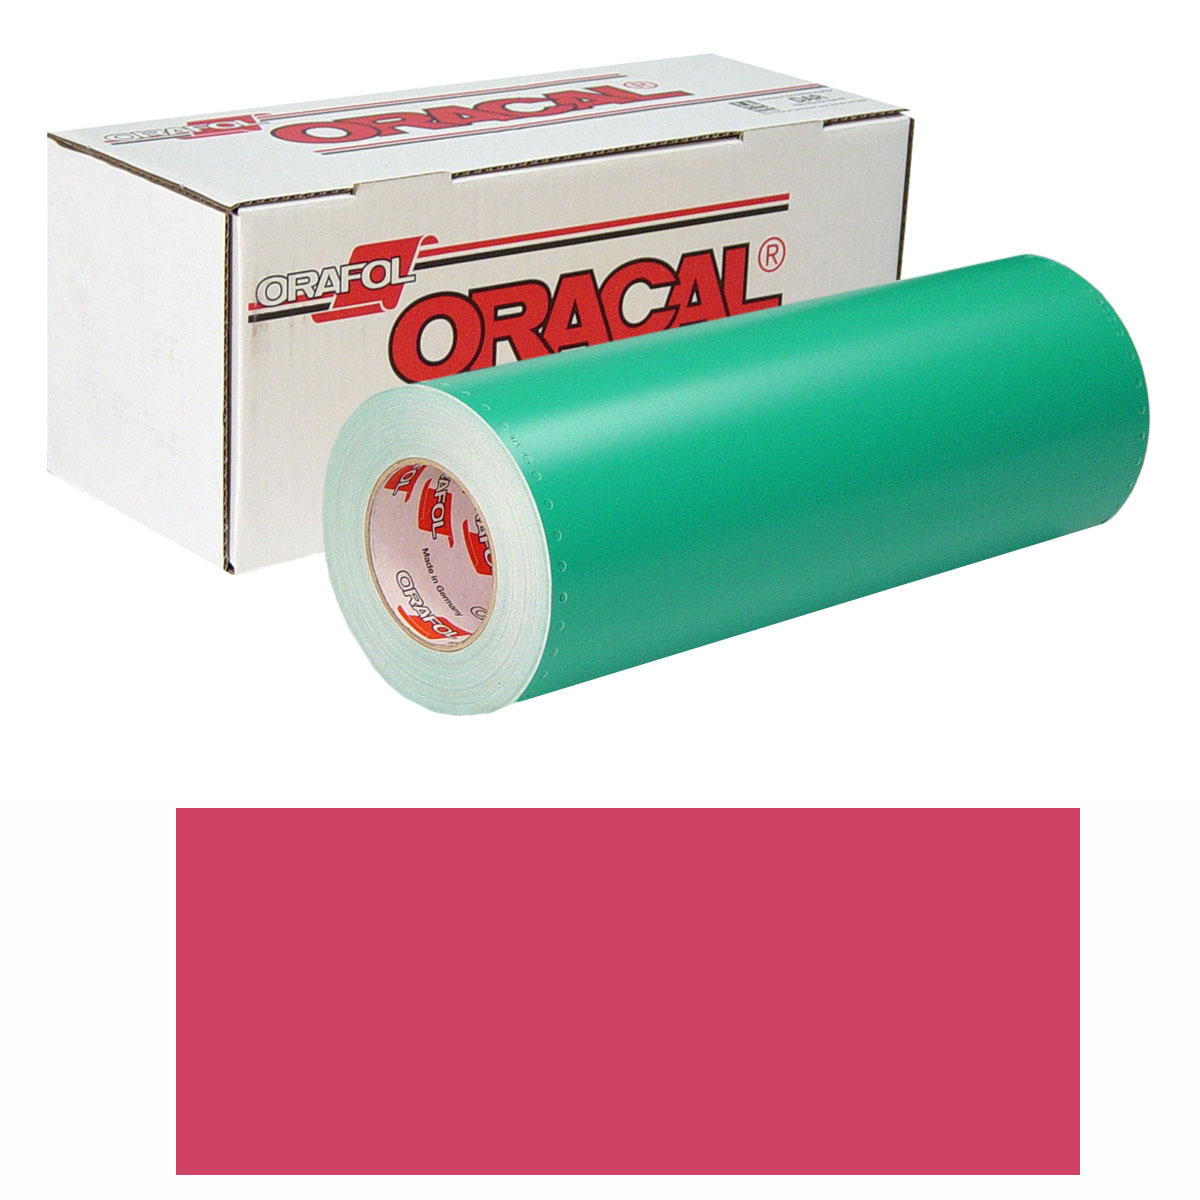 ORACAL 8500 30in X 10yd 017 Cherry Red